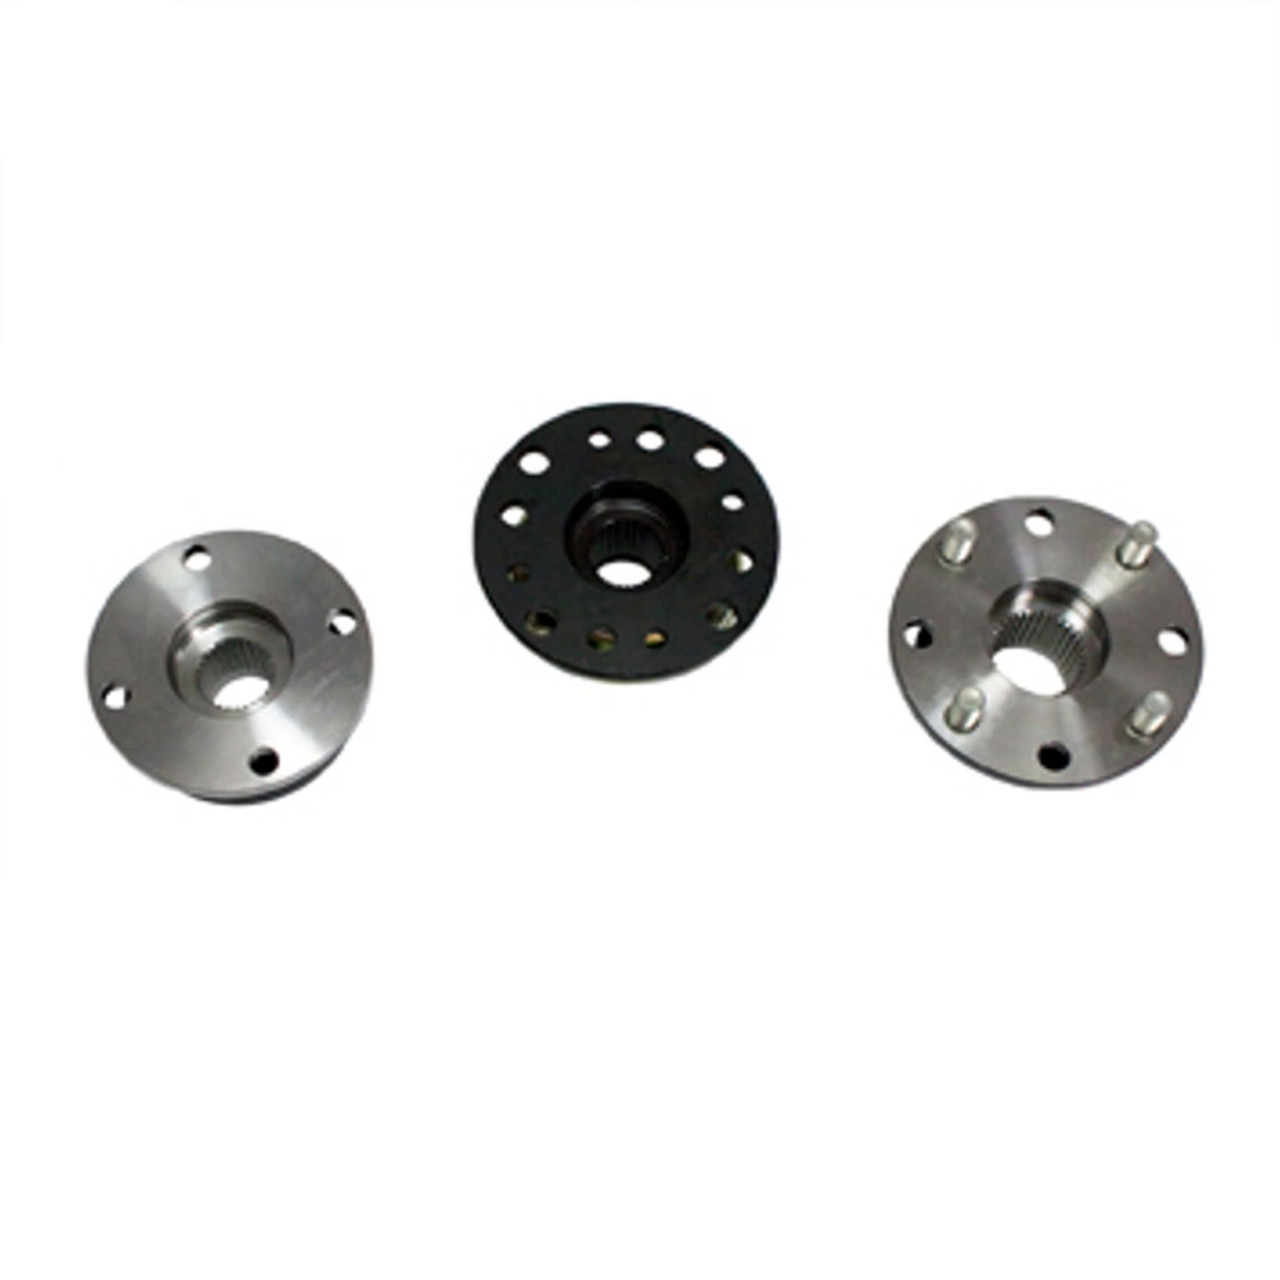 Yukon small hole yoke for '82 and older Toyota T100 and Tacoma (with locker) with 27 spline pinion (YYT35080)